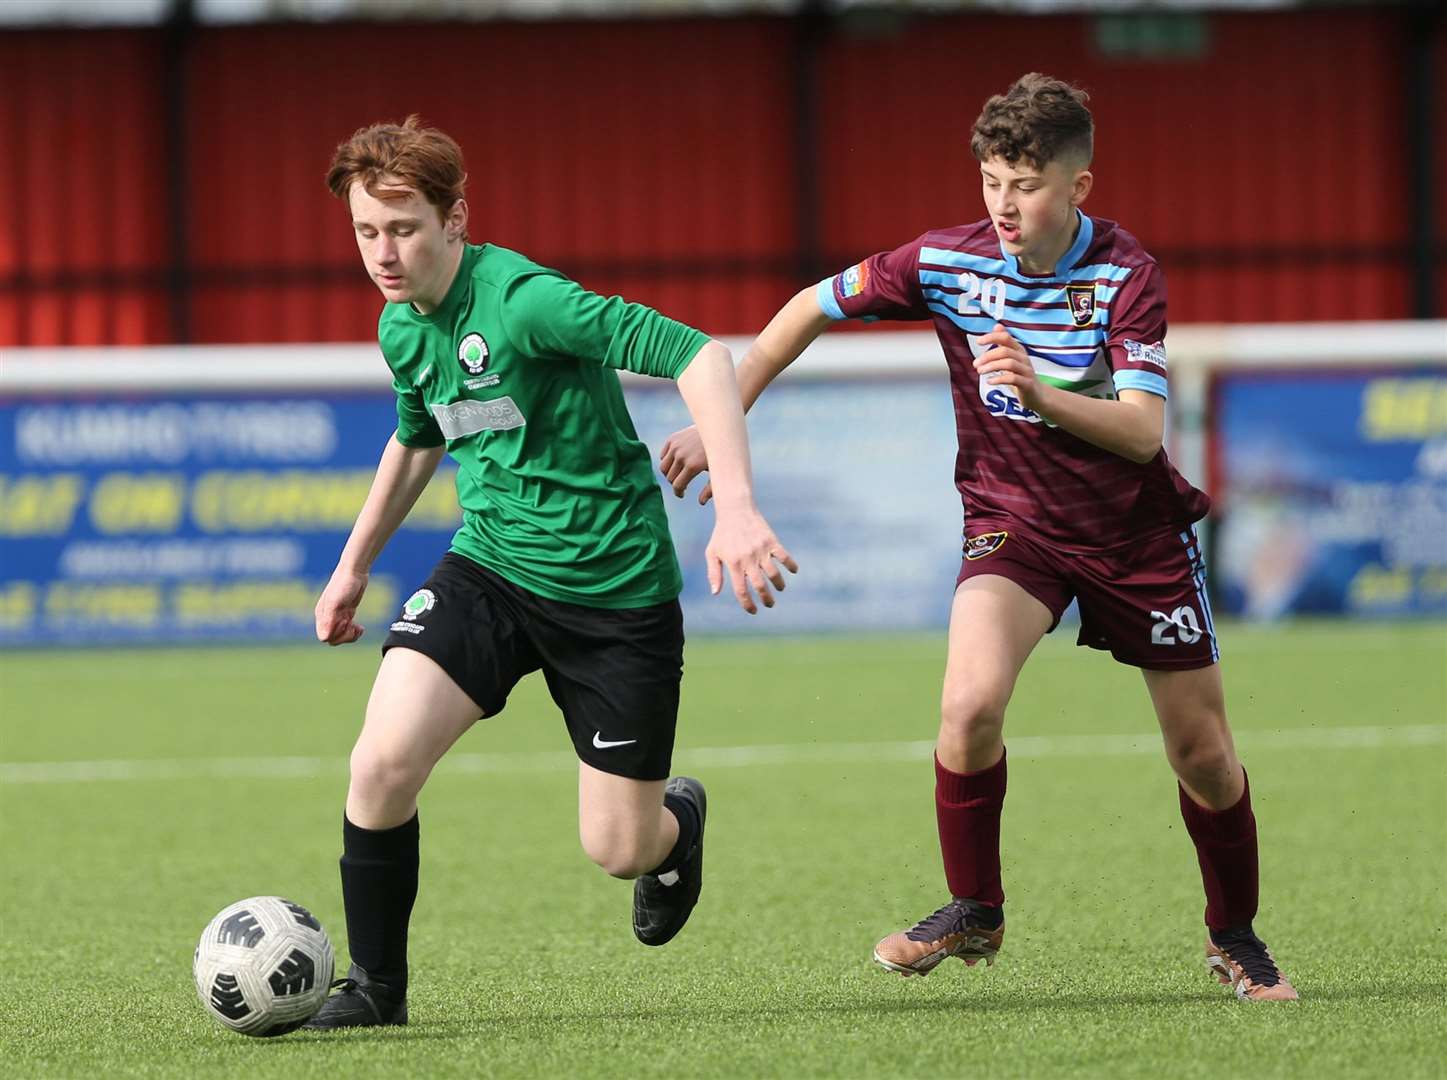 Vinters Rangers under-15s (green) get ahead of Wigmore Youth under-15s. Picture: PSP Images